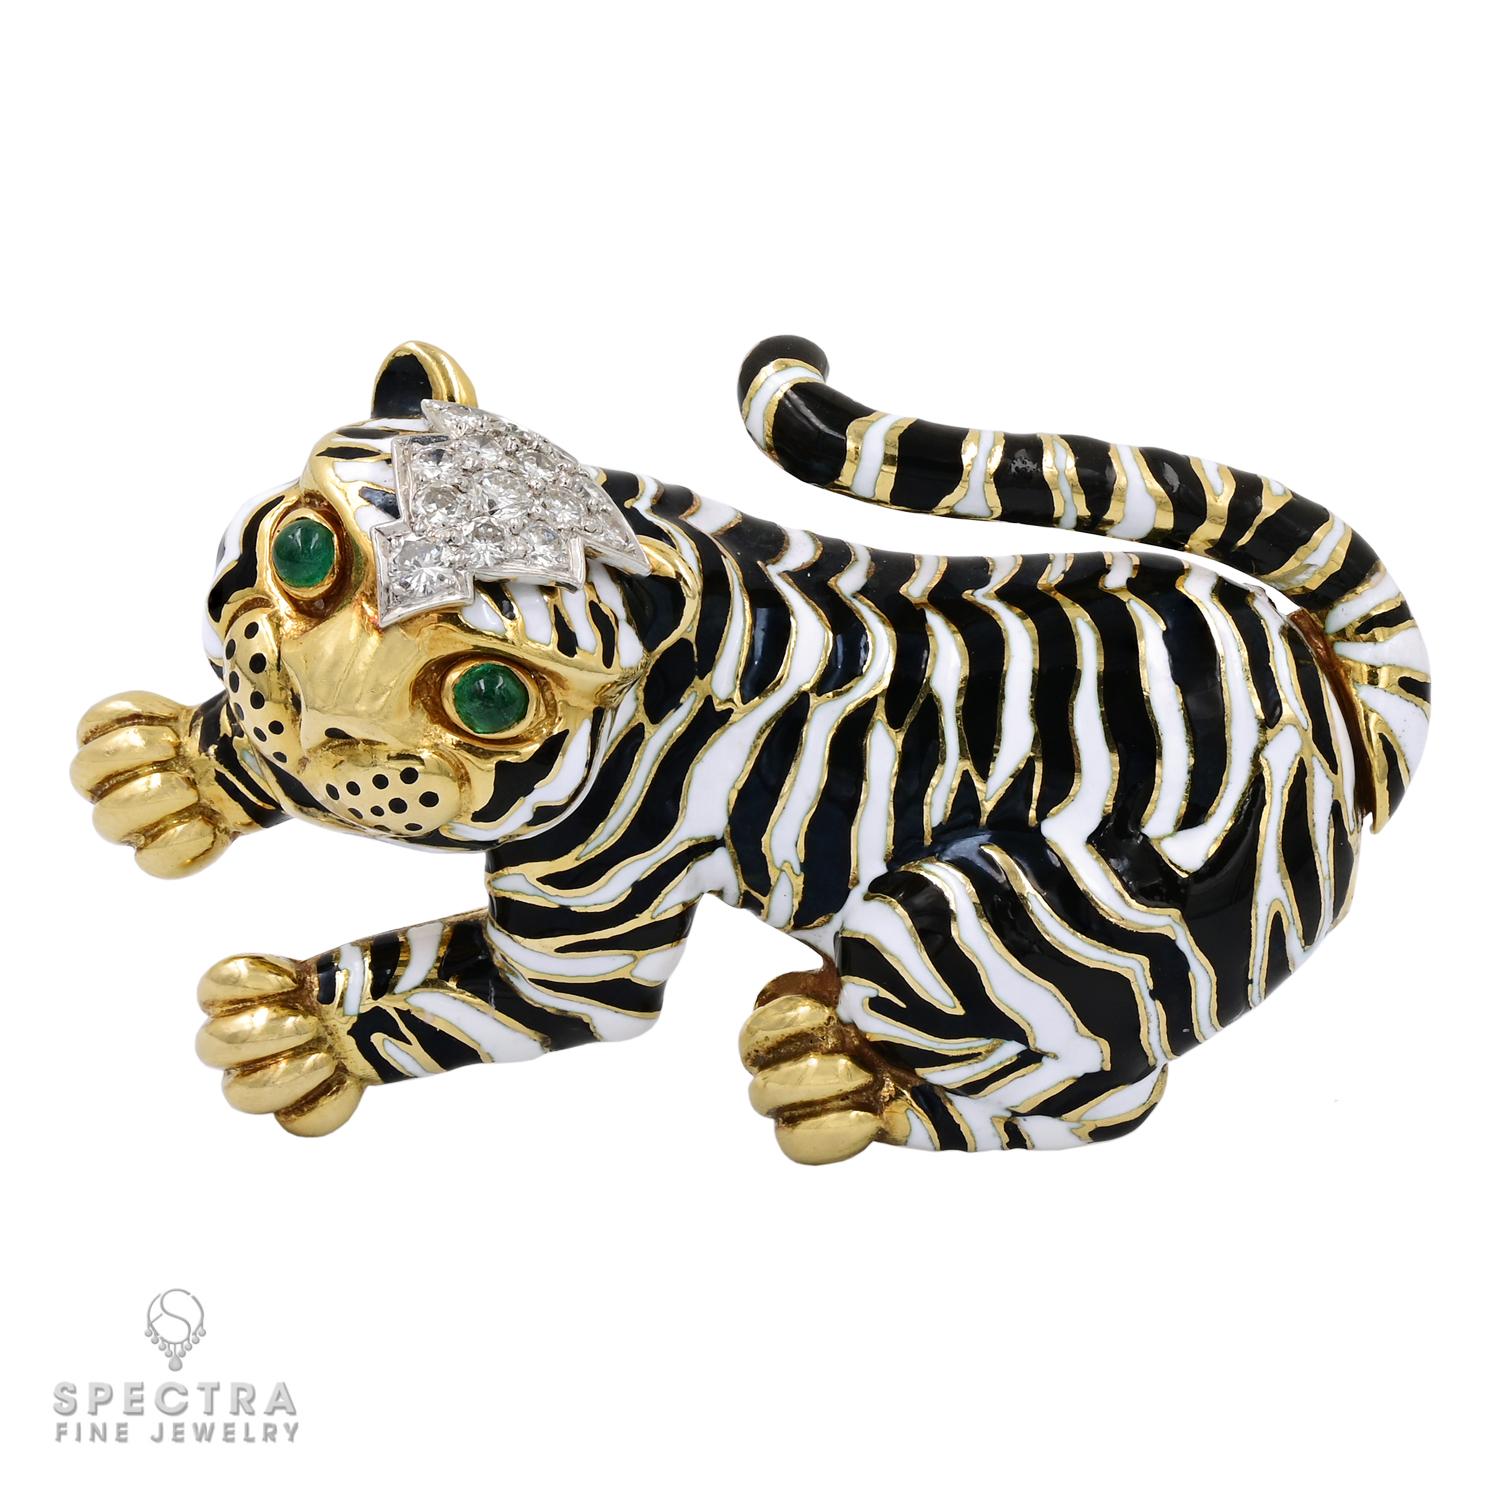 Step into the wild elegance of the 80s with the vintage David Webb Tiger Brooch from the iconic 'Kingdom' collection. This extraordinary piece exudes an air of regal grandeur, capturing the fierce and majestic spirit of the jungle in meticulous